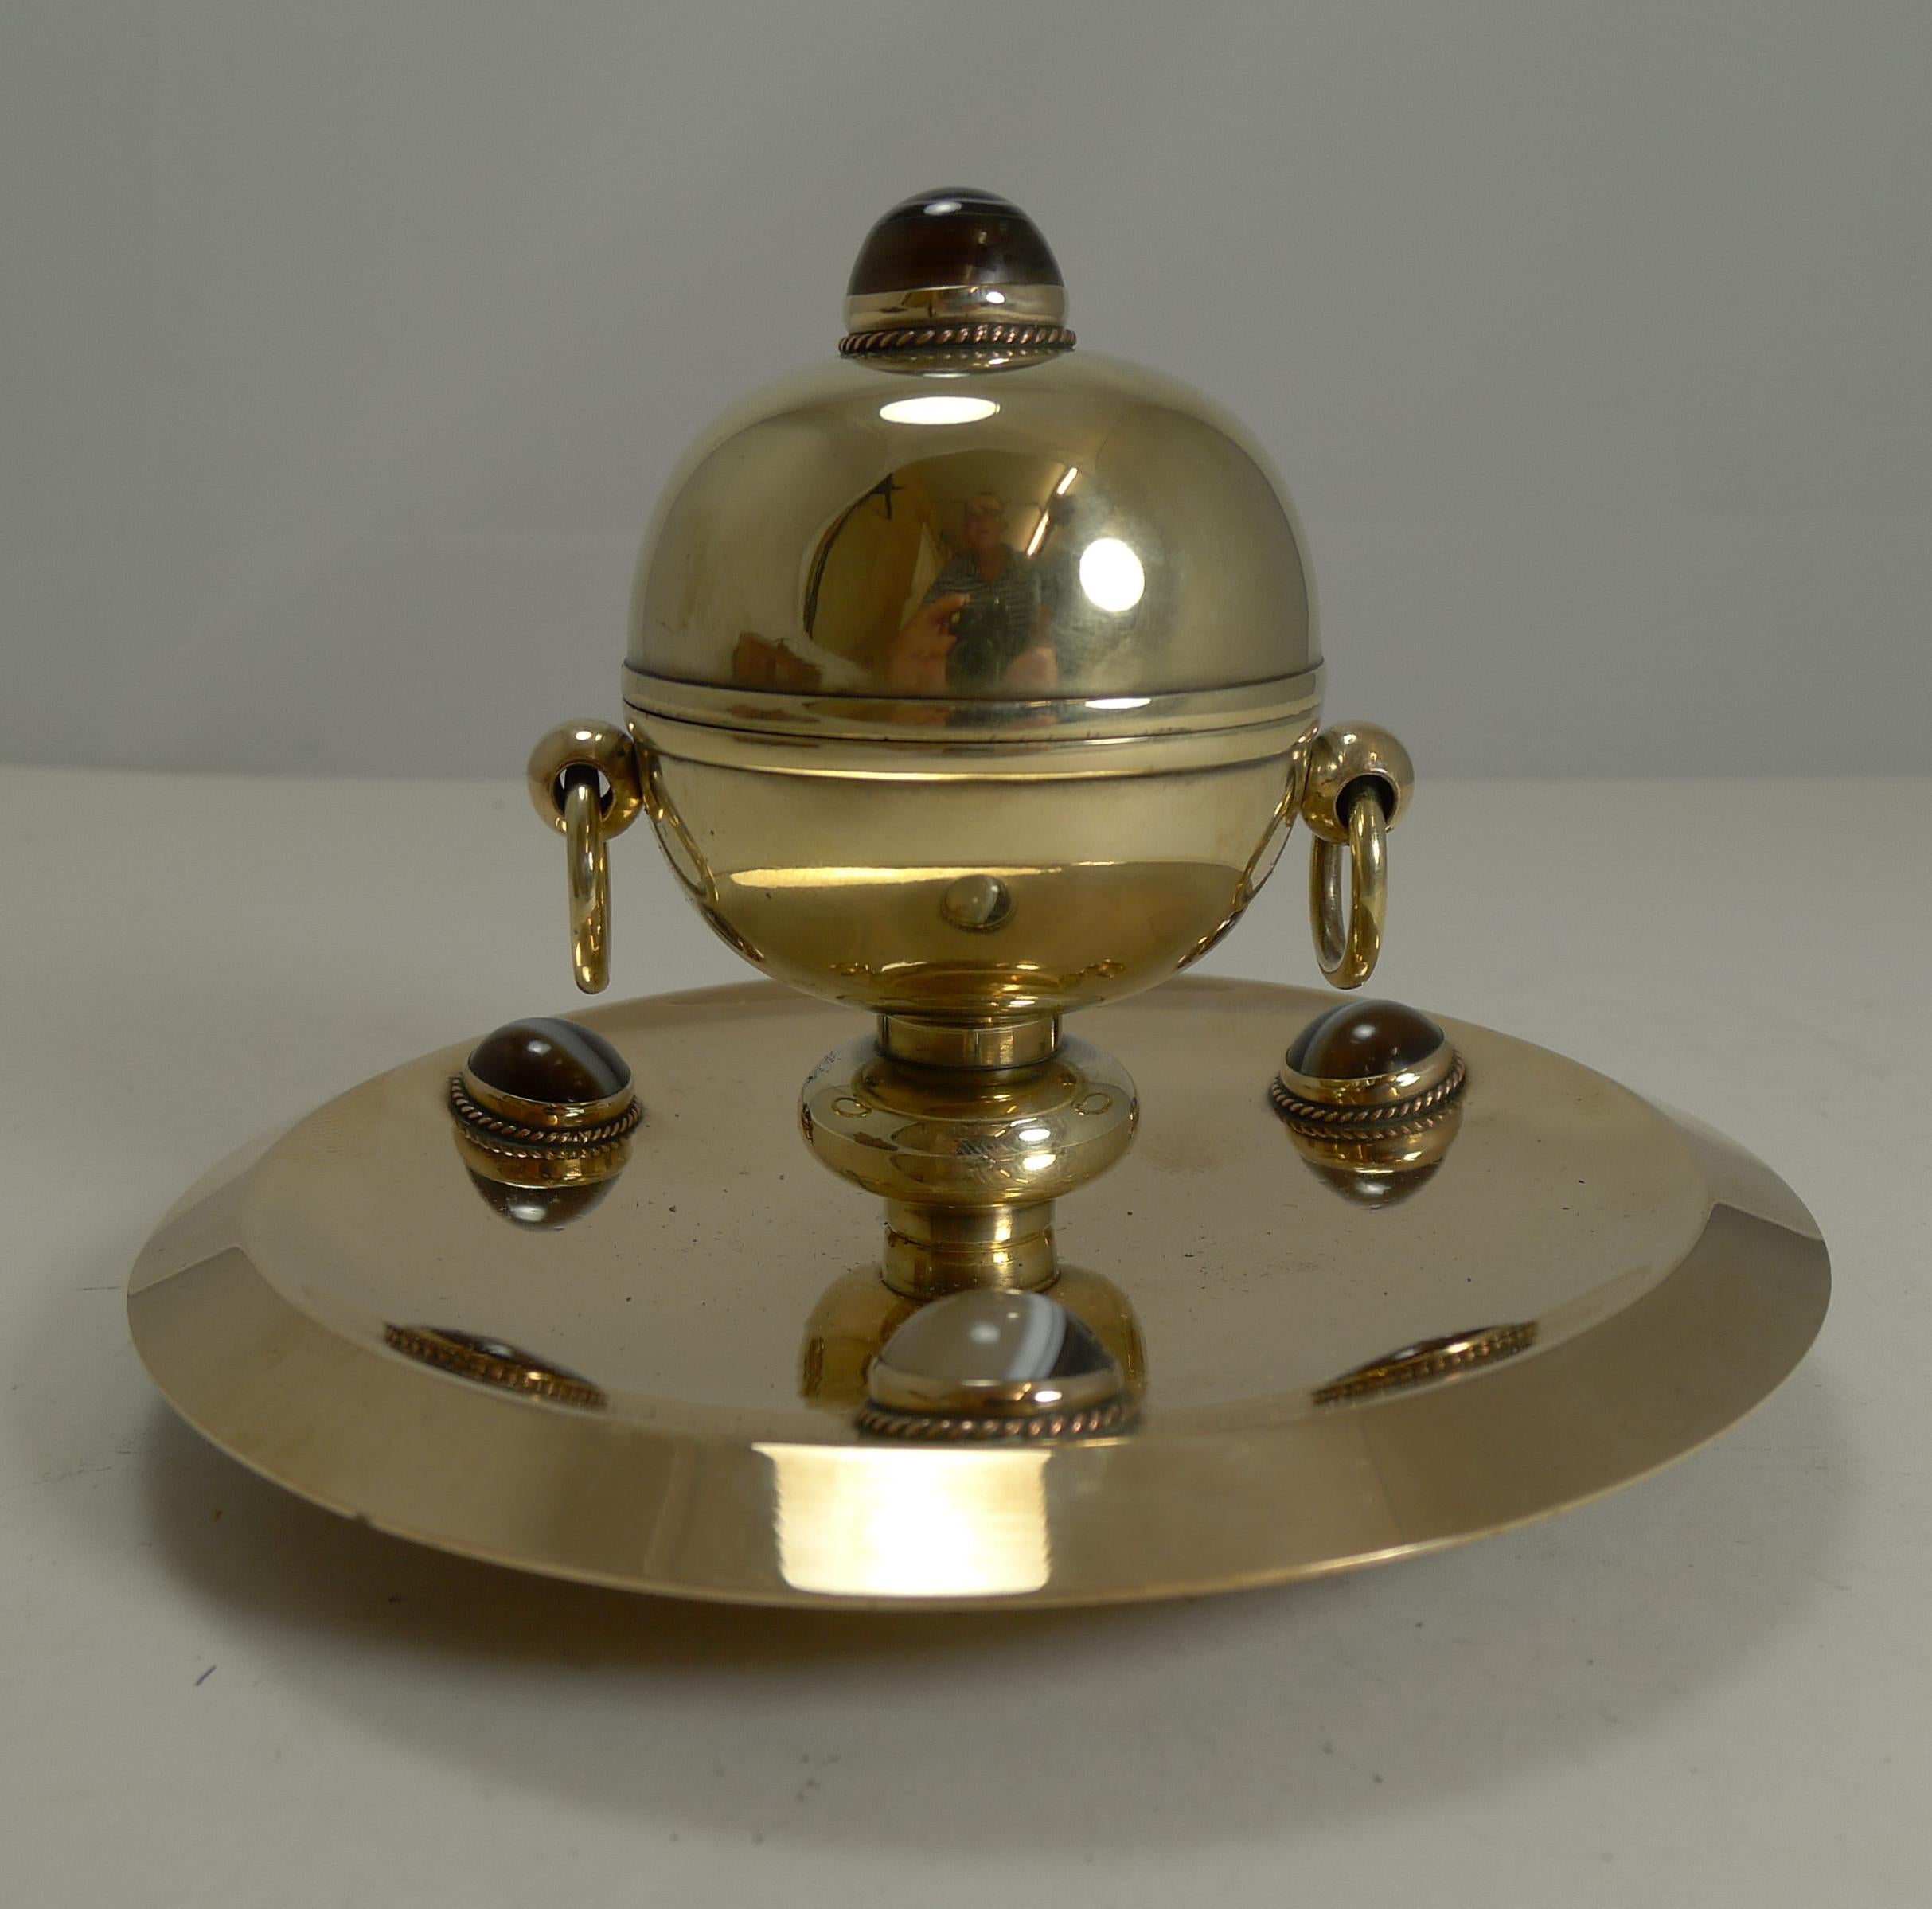 A handsome Victorian English inkwell made from a combination of polished bronze (base) and brass (spherical inkwell). The metals have been professionally polished to gleam showcasing the four polished cabochon agate stones. There is a ring handle to